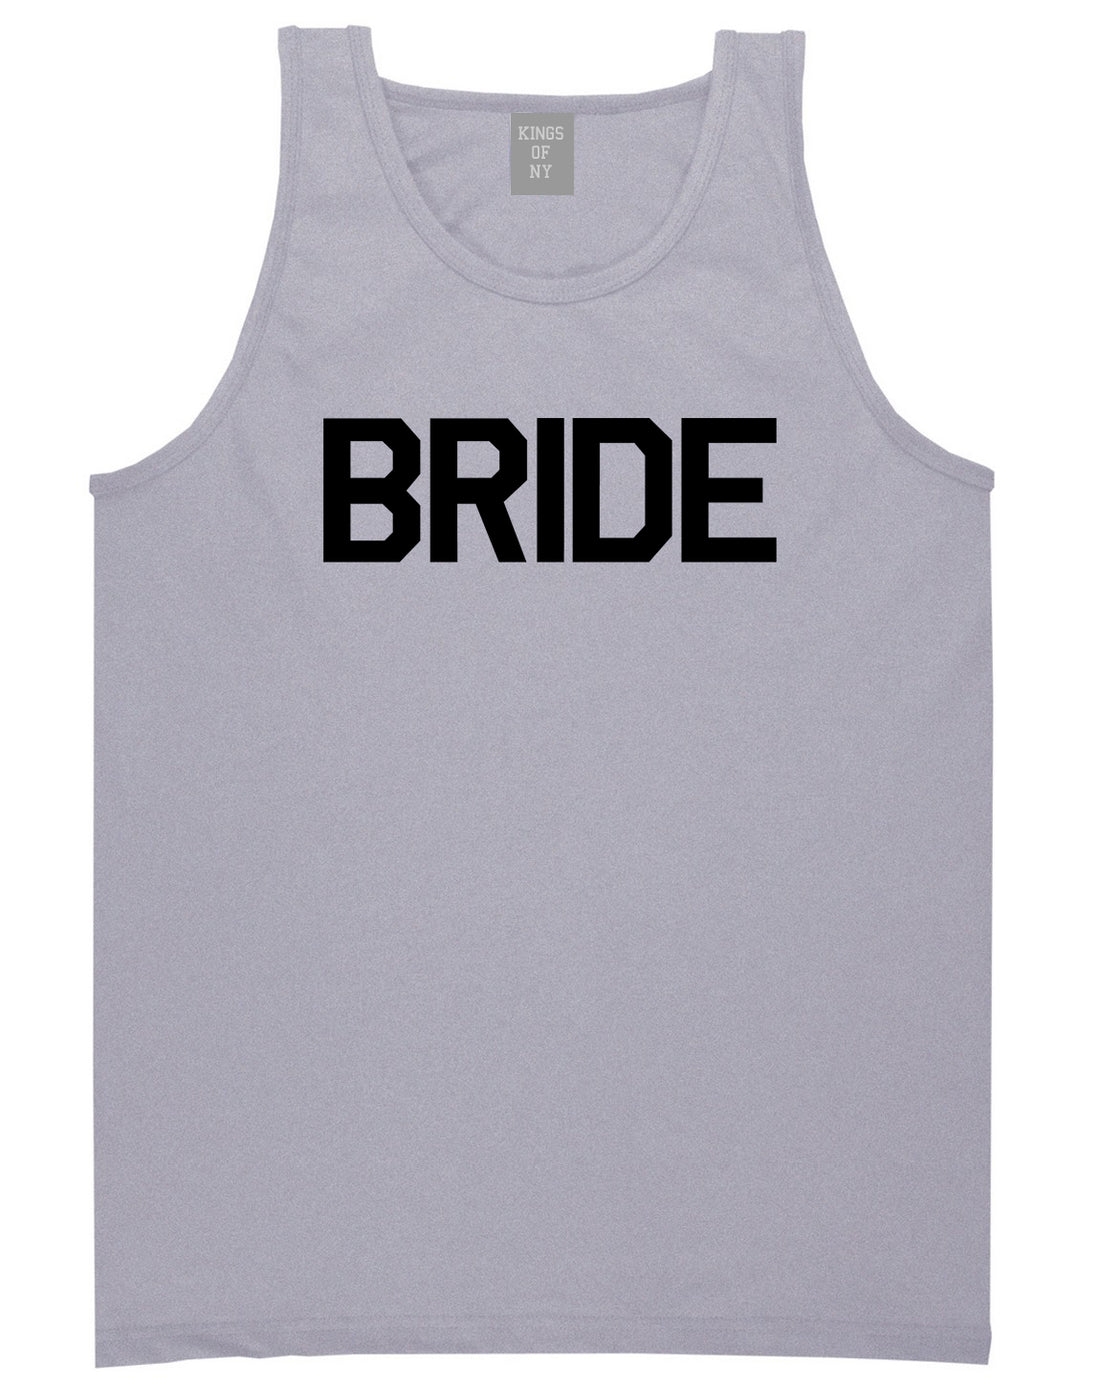 Bride Bachlorette Party Grey Tank Top Shirt by Kings Of NY